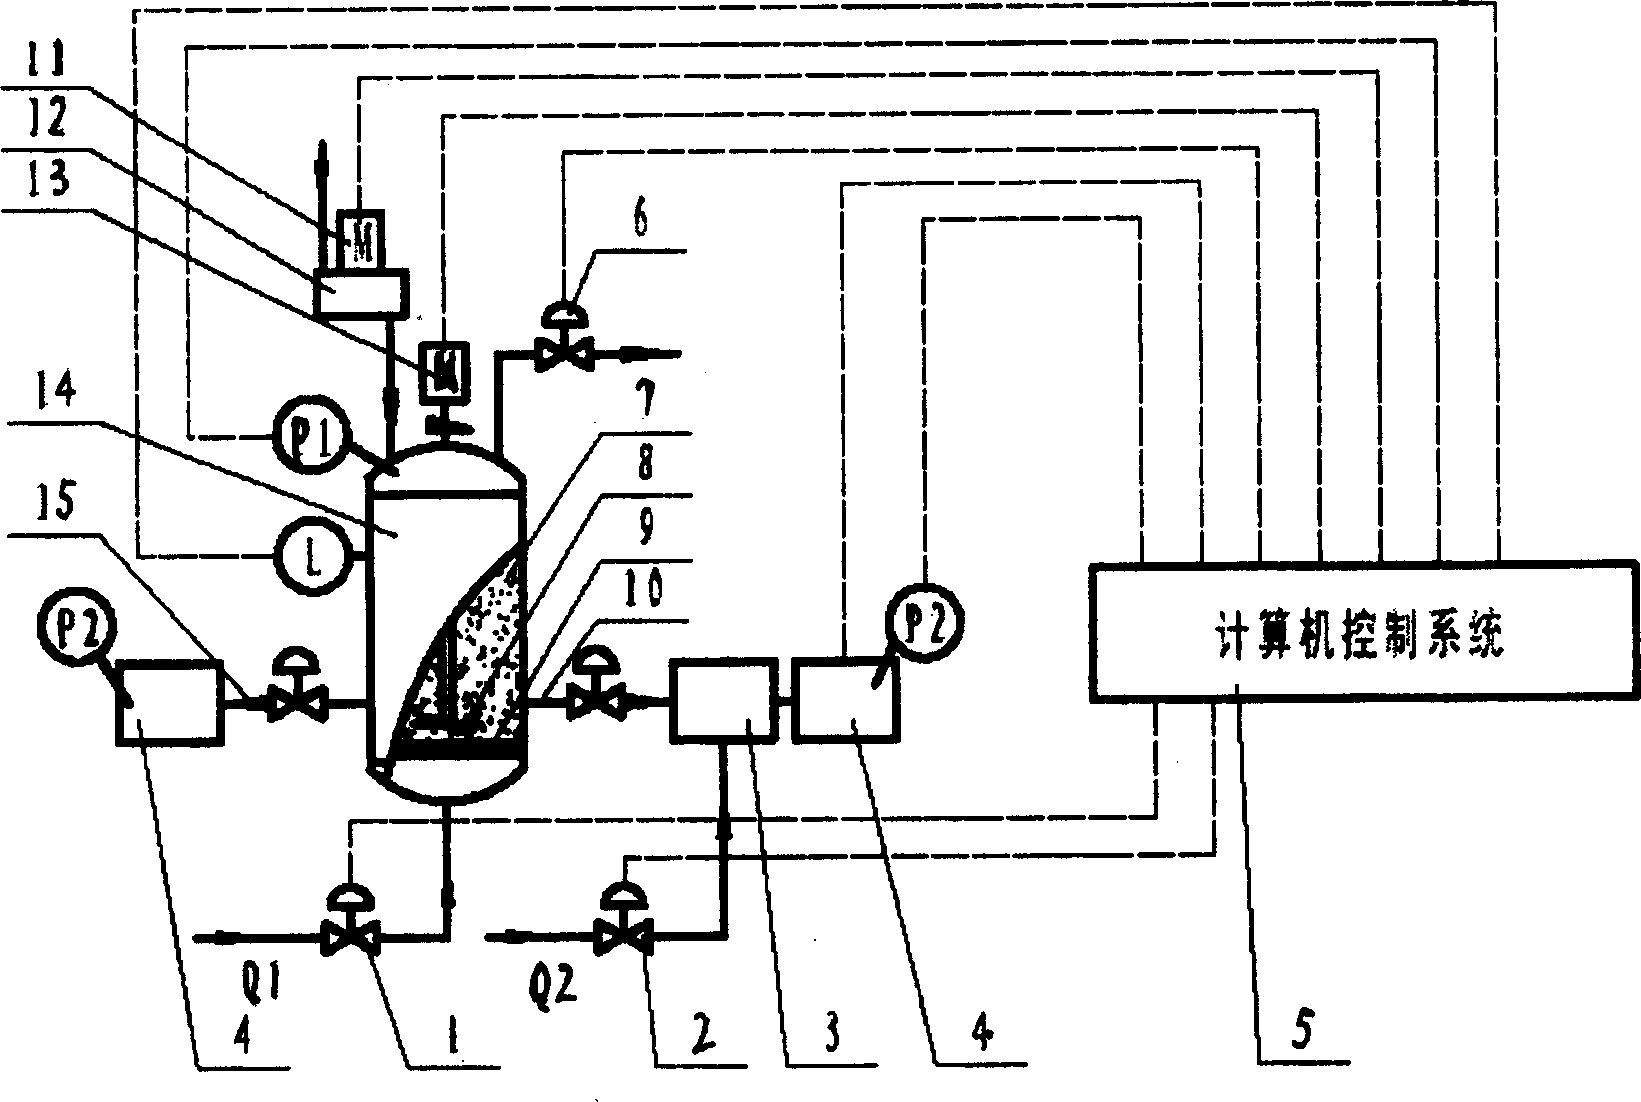 Fixed fluidized bed powder metering and distributing delivery device and methed of realizing high stability transferring and distributing powder